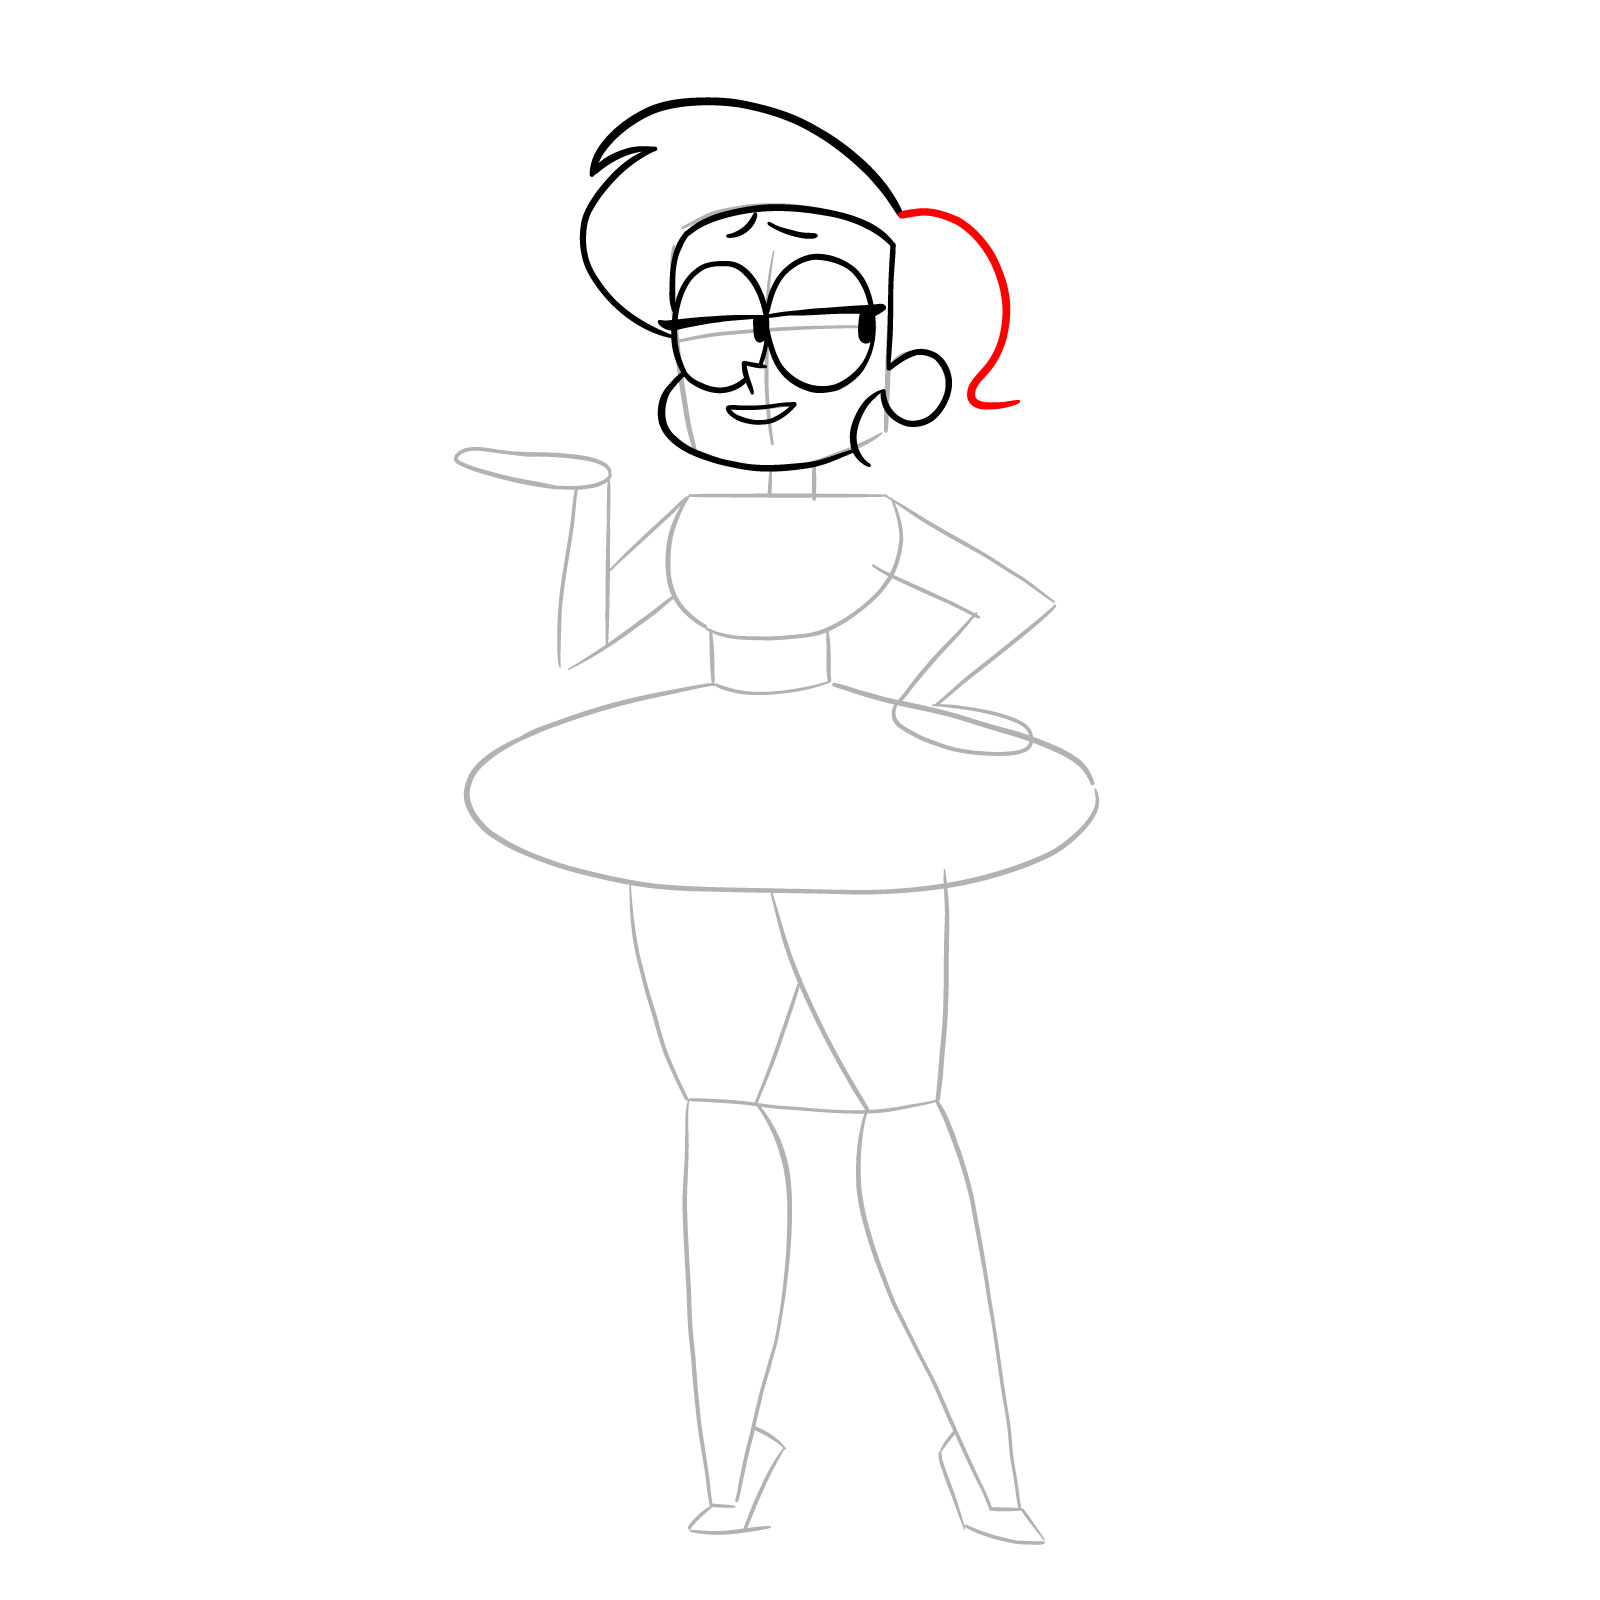 How to draw Elodie from OK K.O.! - step 11